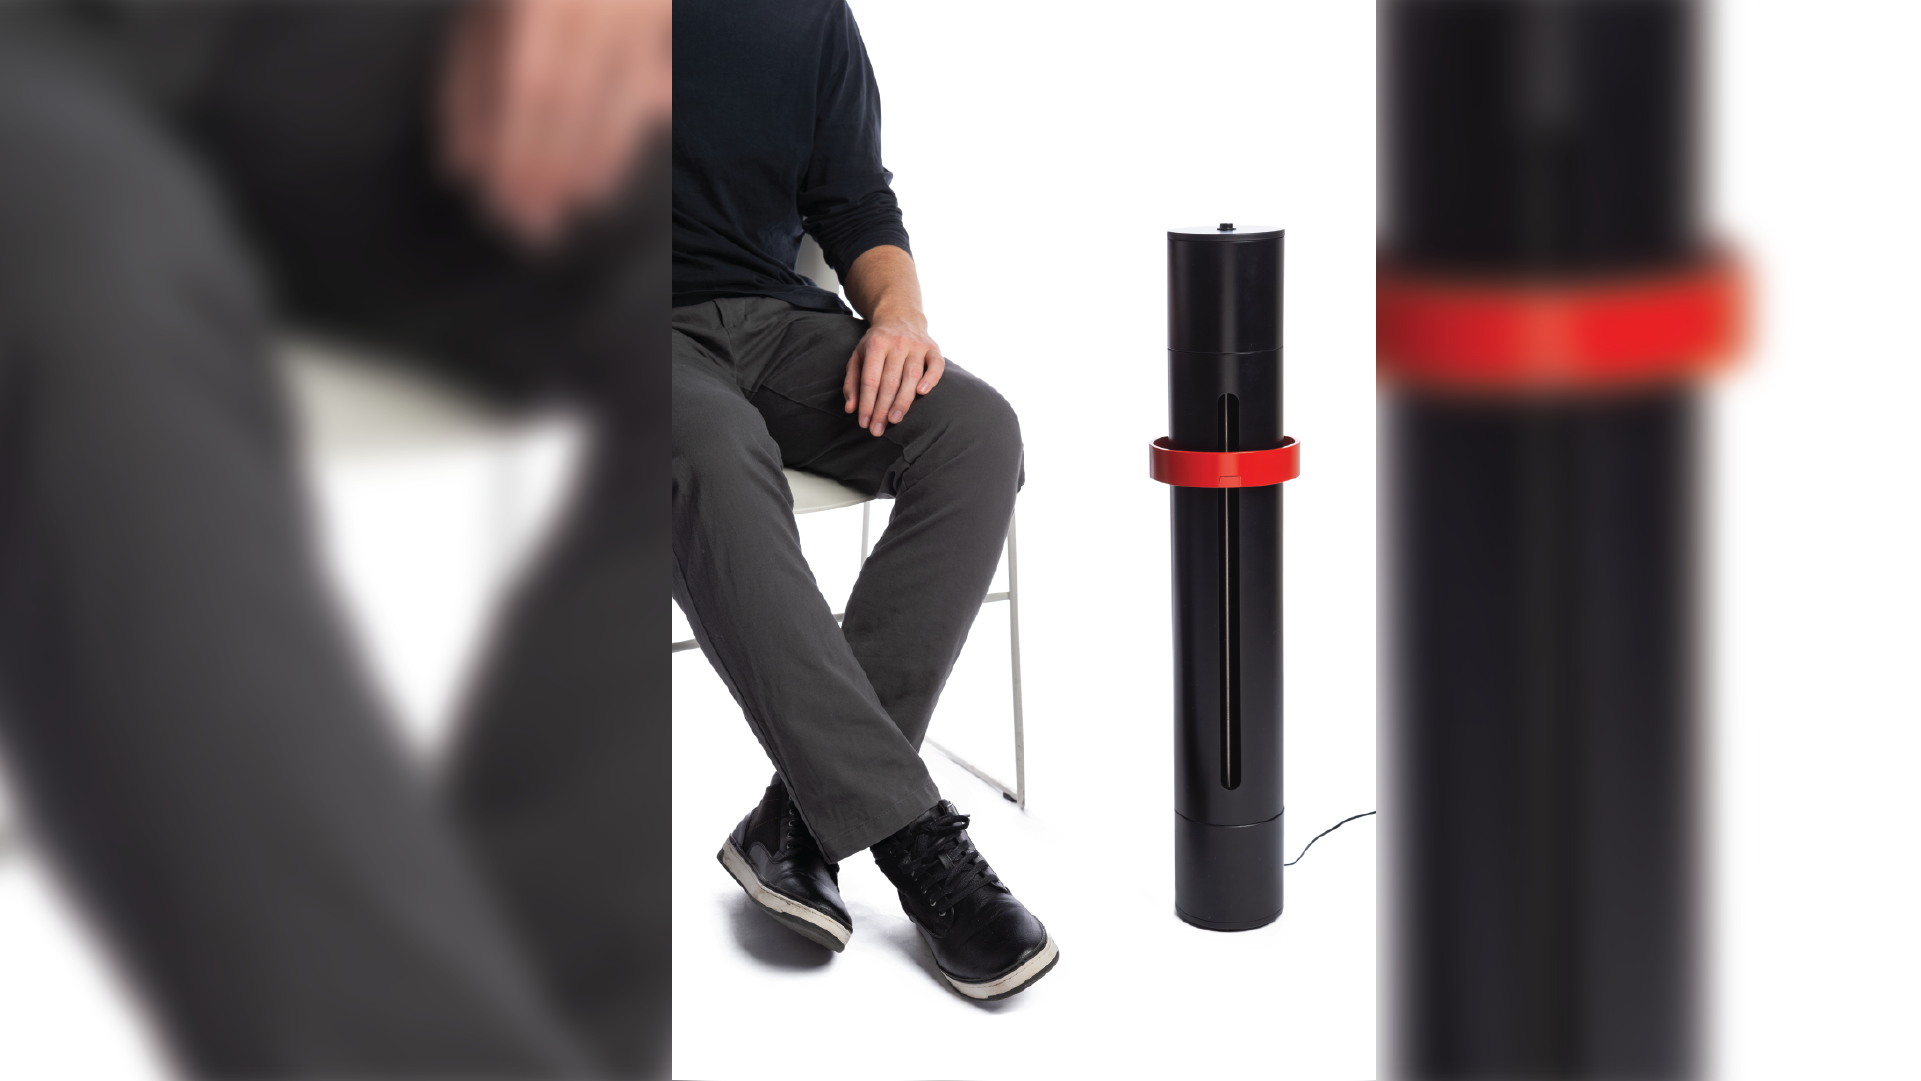 Person sit right by the clock in a black cylindrical shape with a red ring on it.